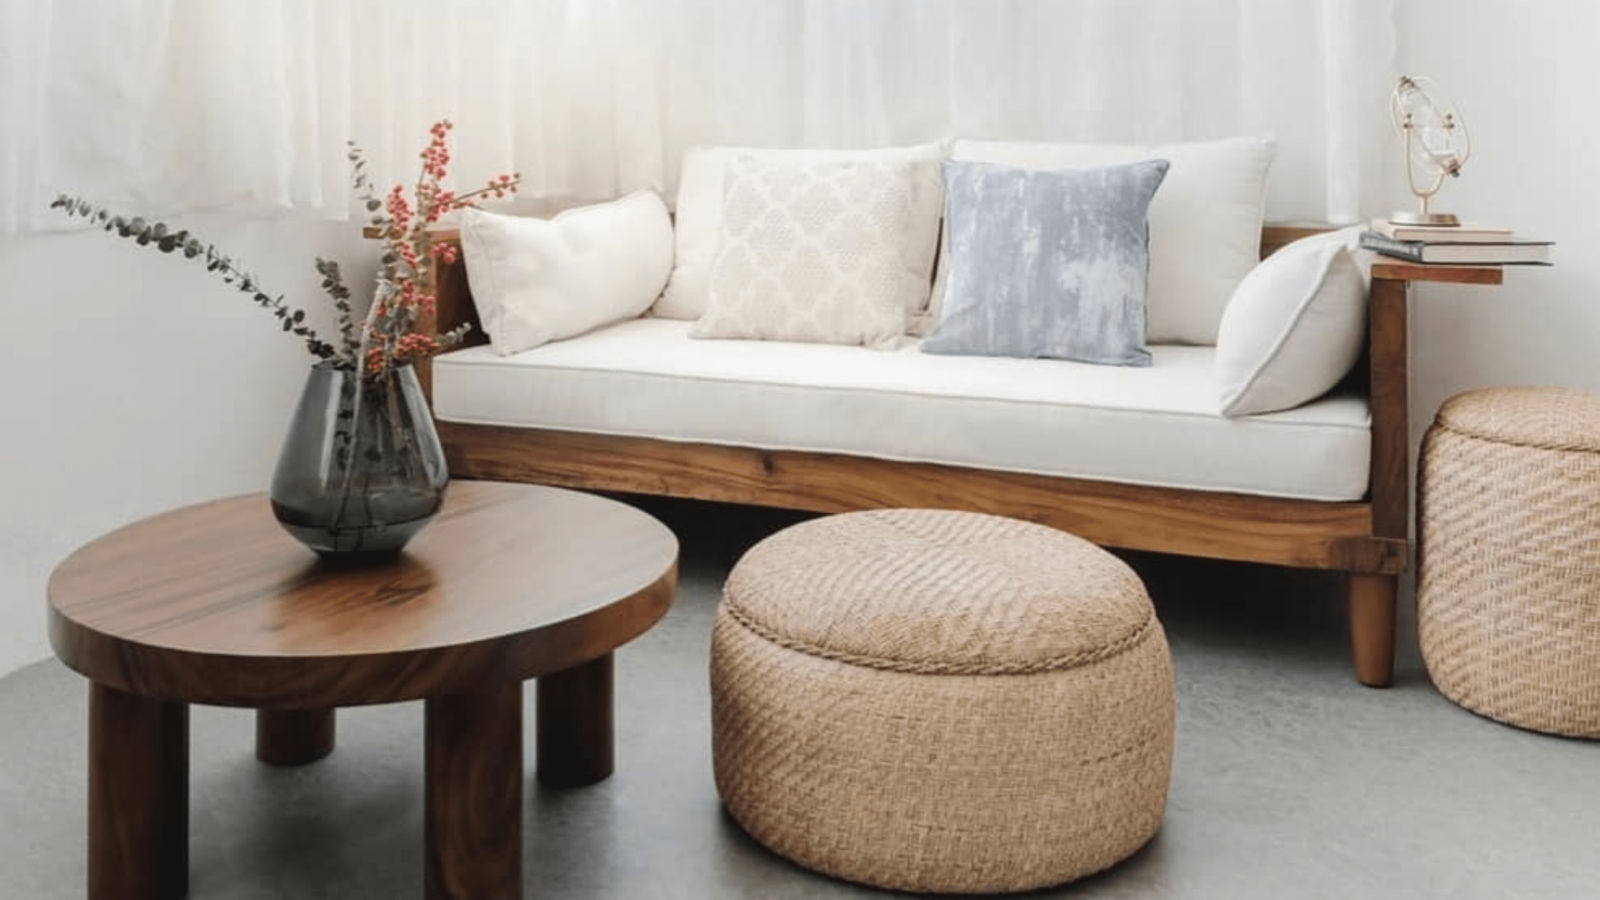 5 tips for sourcing sustainable and eco-friendly furniture in Hong Kong